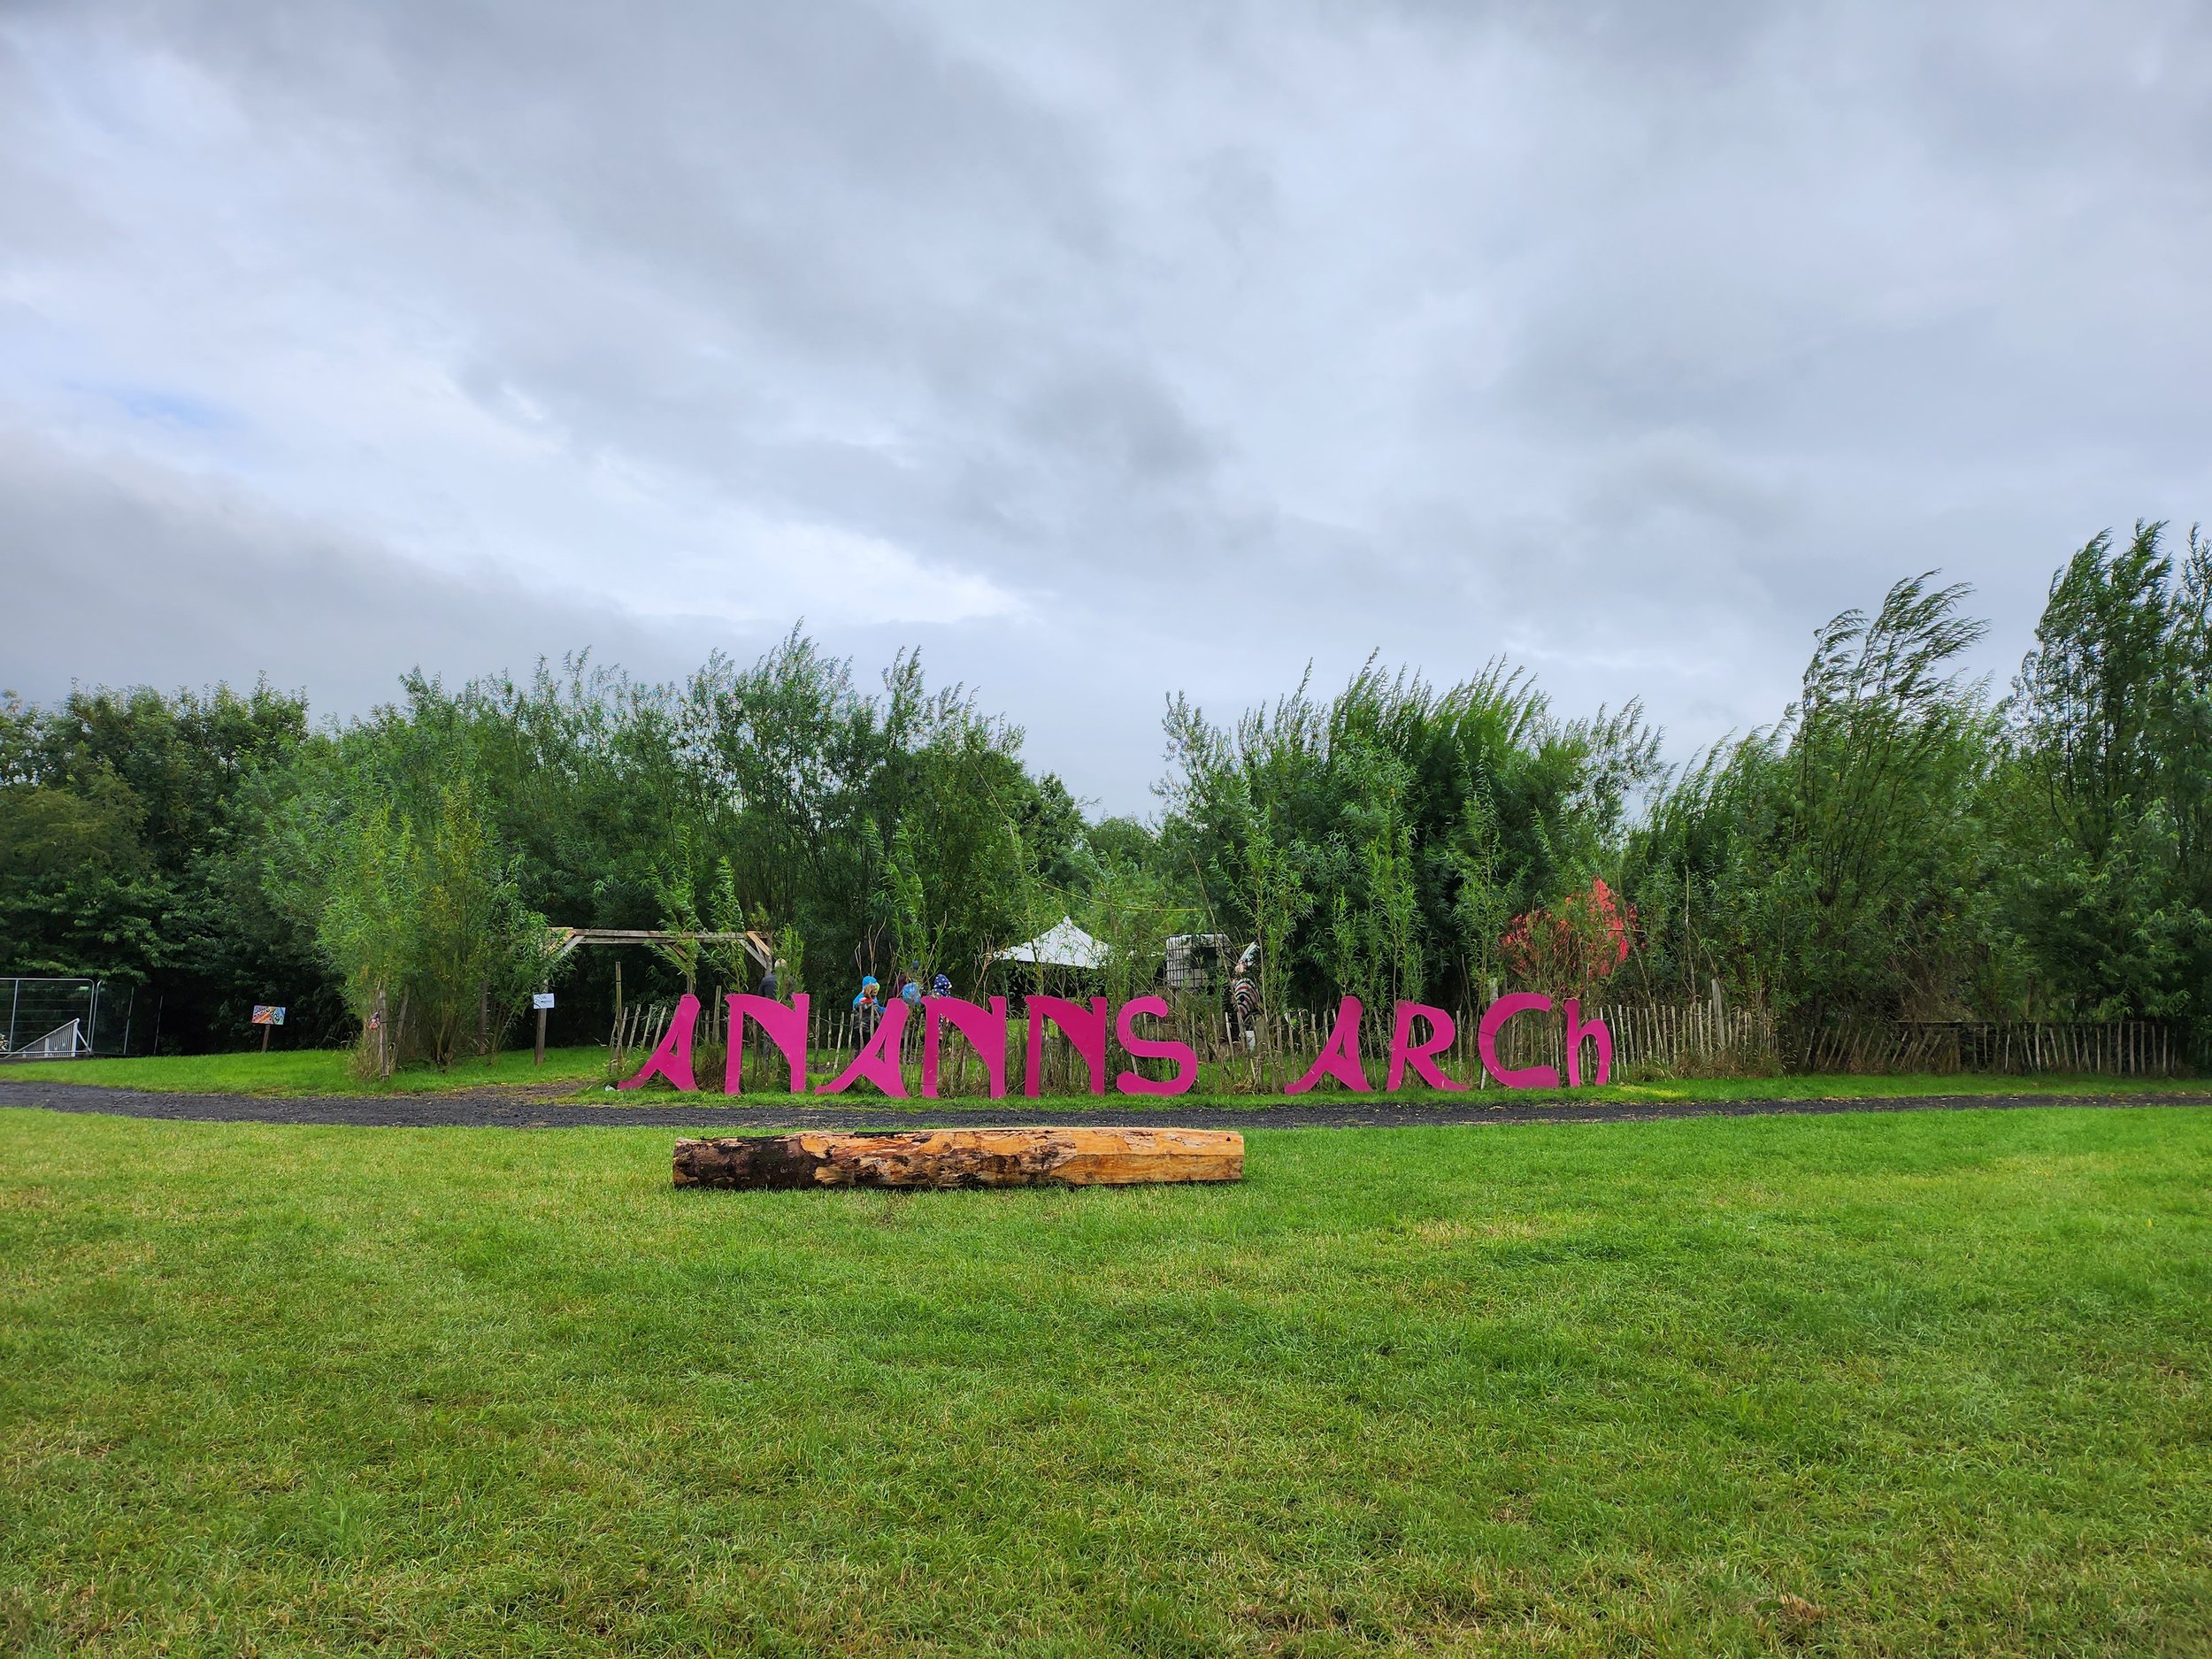 Anann's Arch Sign